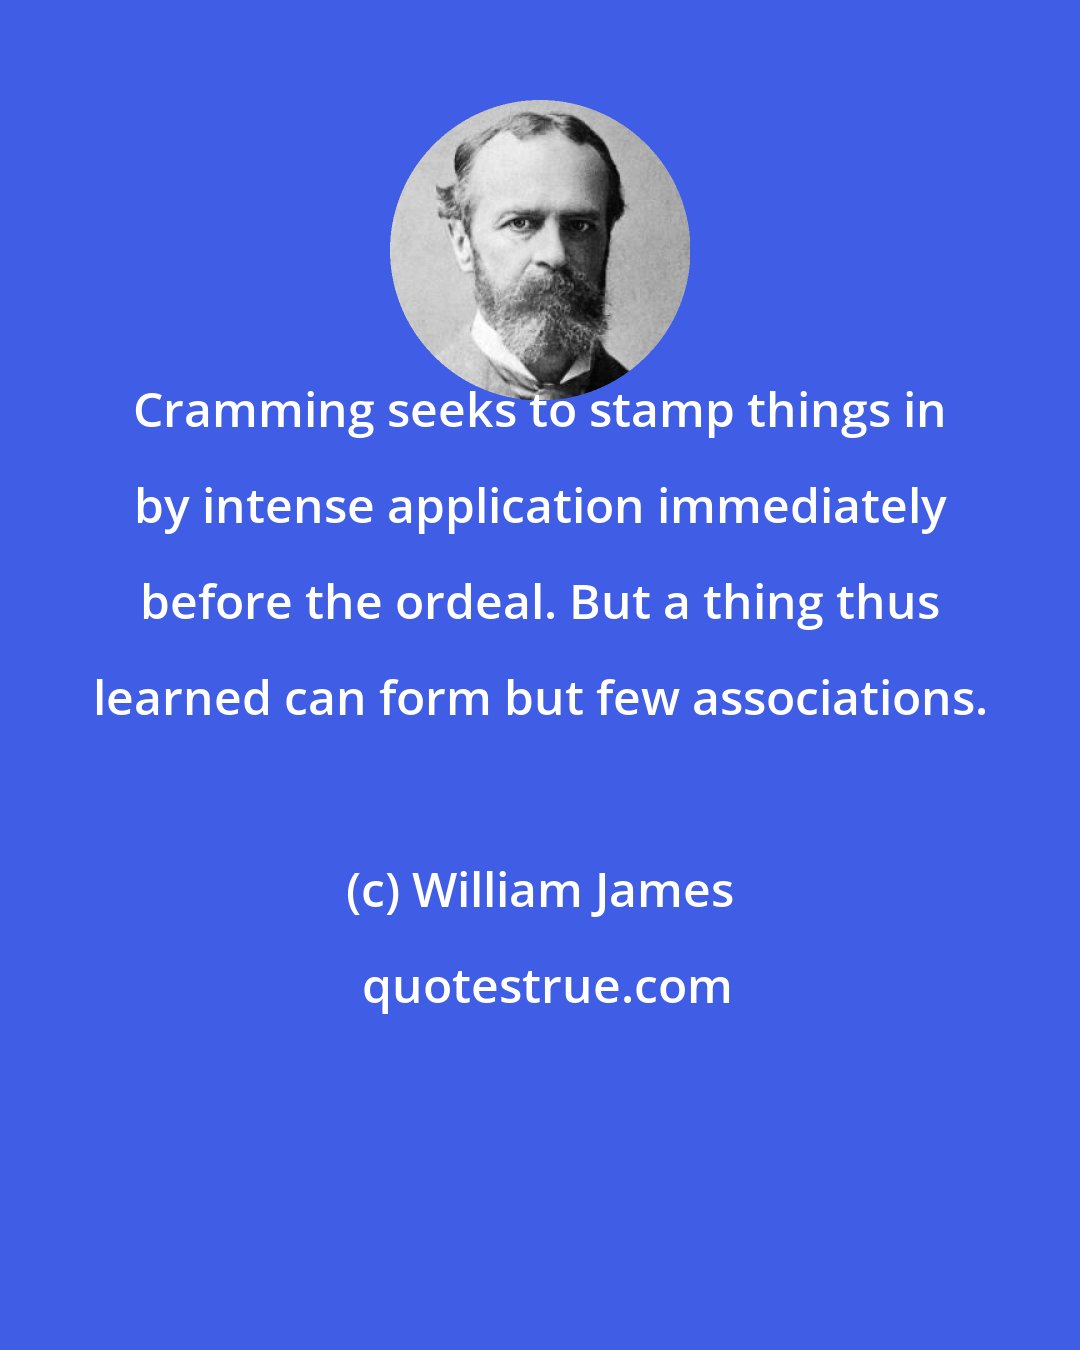 William James: Cramming seeks to stamp things in by intense application immediately before the ordeal. But a thing thus learned can form but few associations.